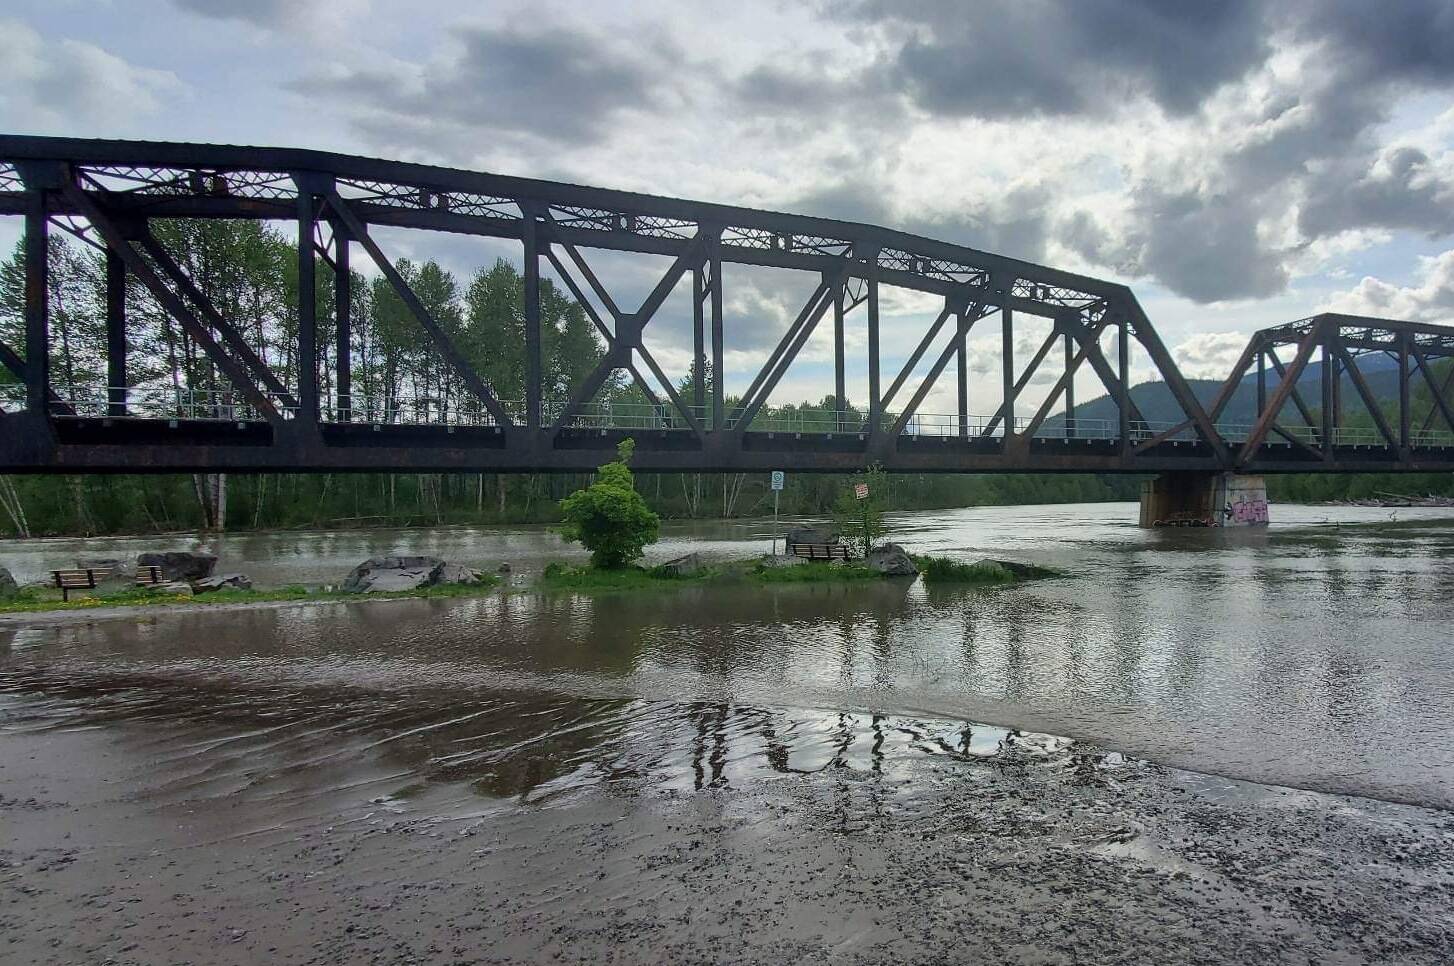 Water levels at the Kalum River Bridge, just east of Terrace, begin to recede on May 21. The B.C. River Forecast Centre downgraded its flood warning to a flood watch for the Skeena Region, including Terrace, as a high-pressure system that brought record-breaking temperatures and flooding to the region dissipates. (Submitted photo)